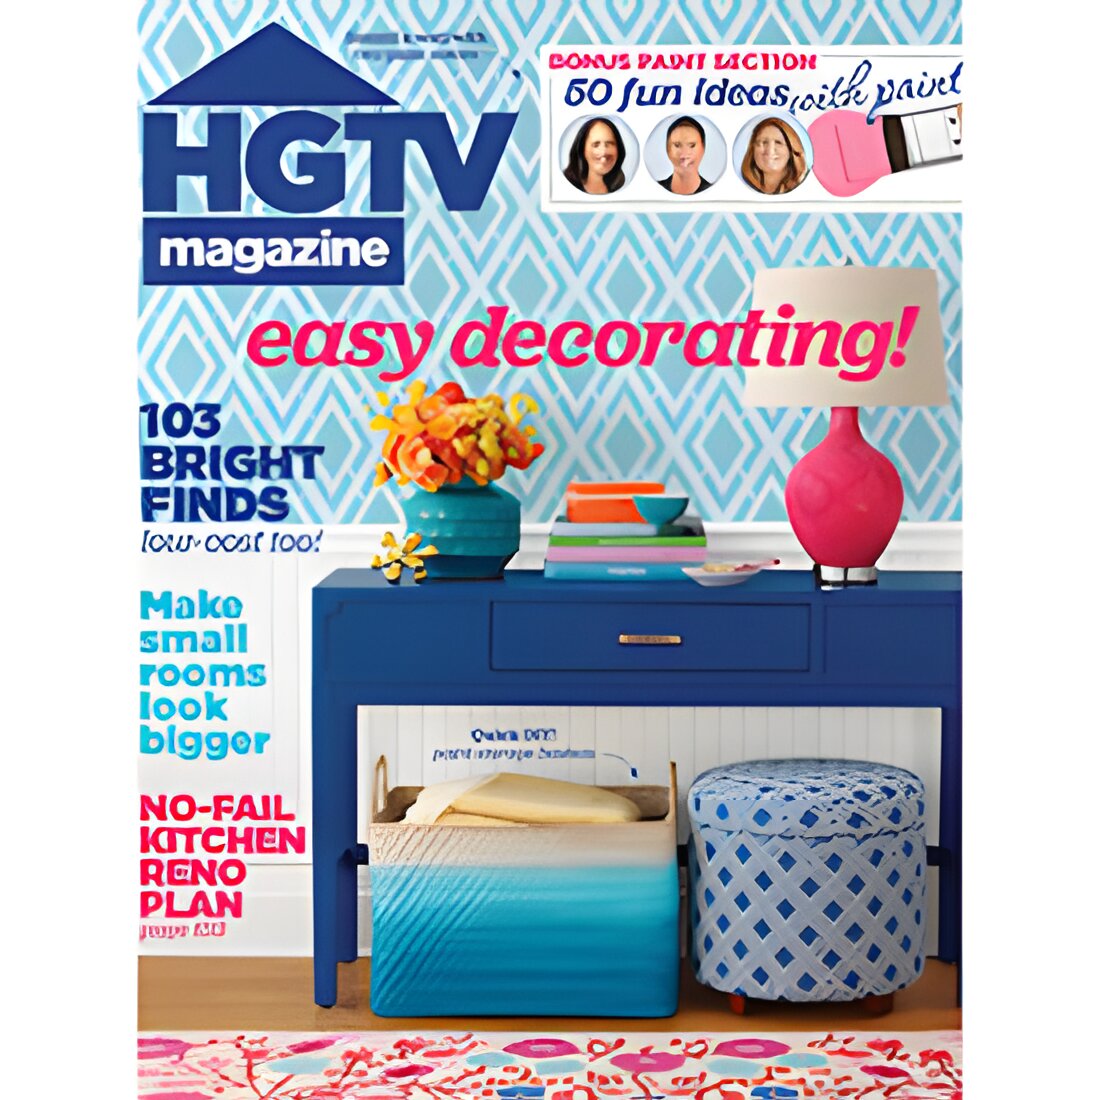 Free Complimentary 2-Year Subscription To Hgtv Magazine